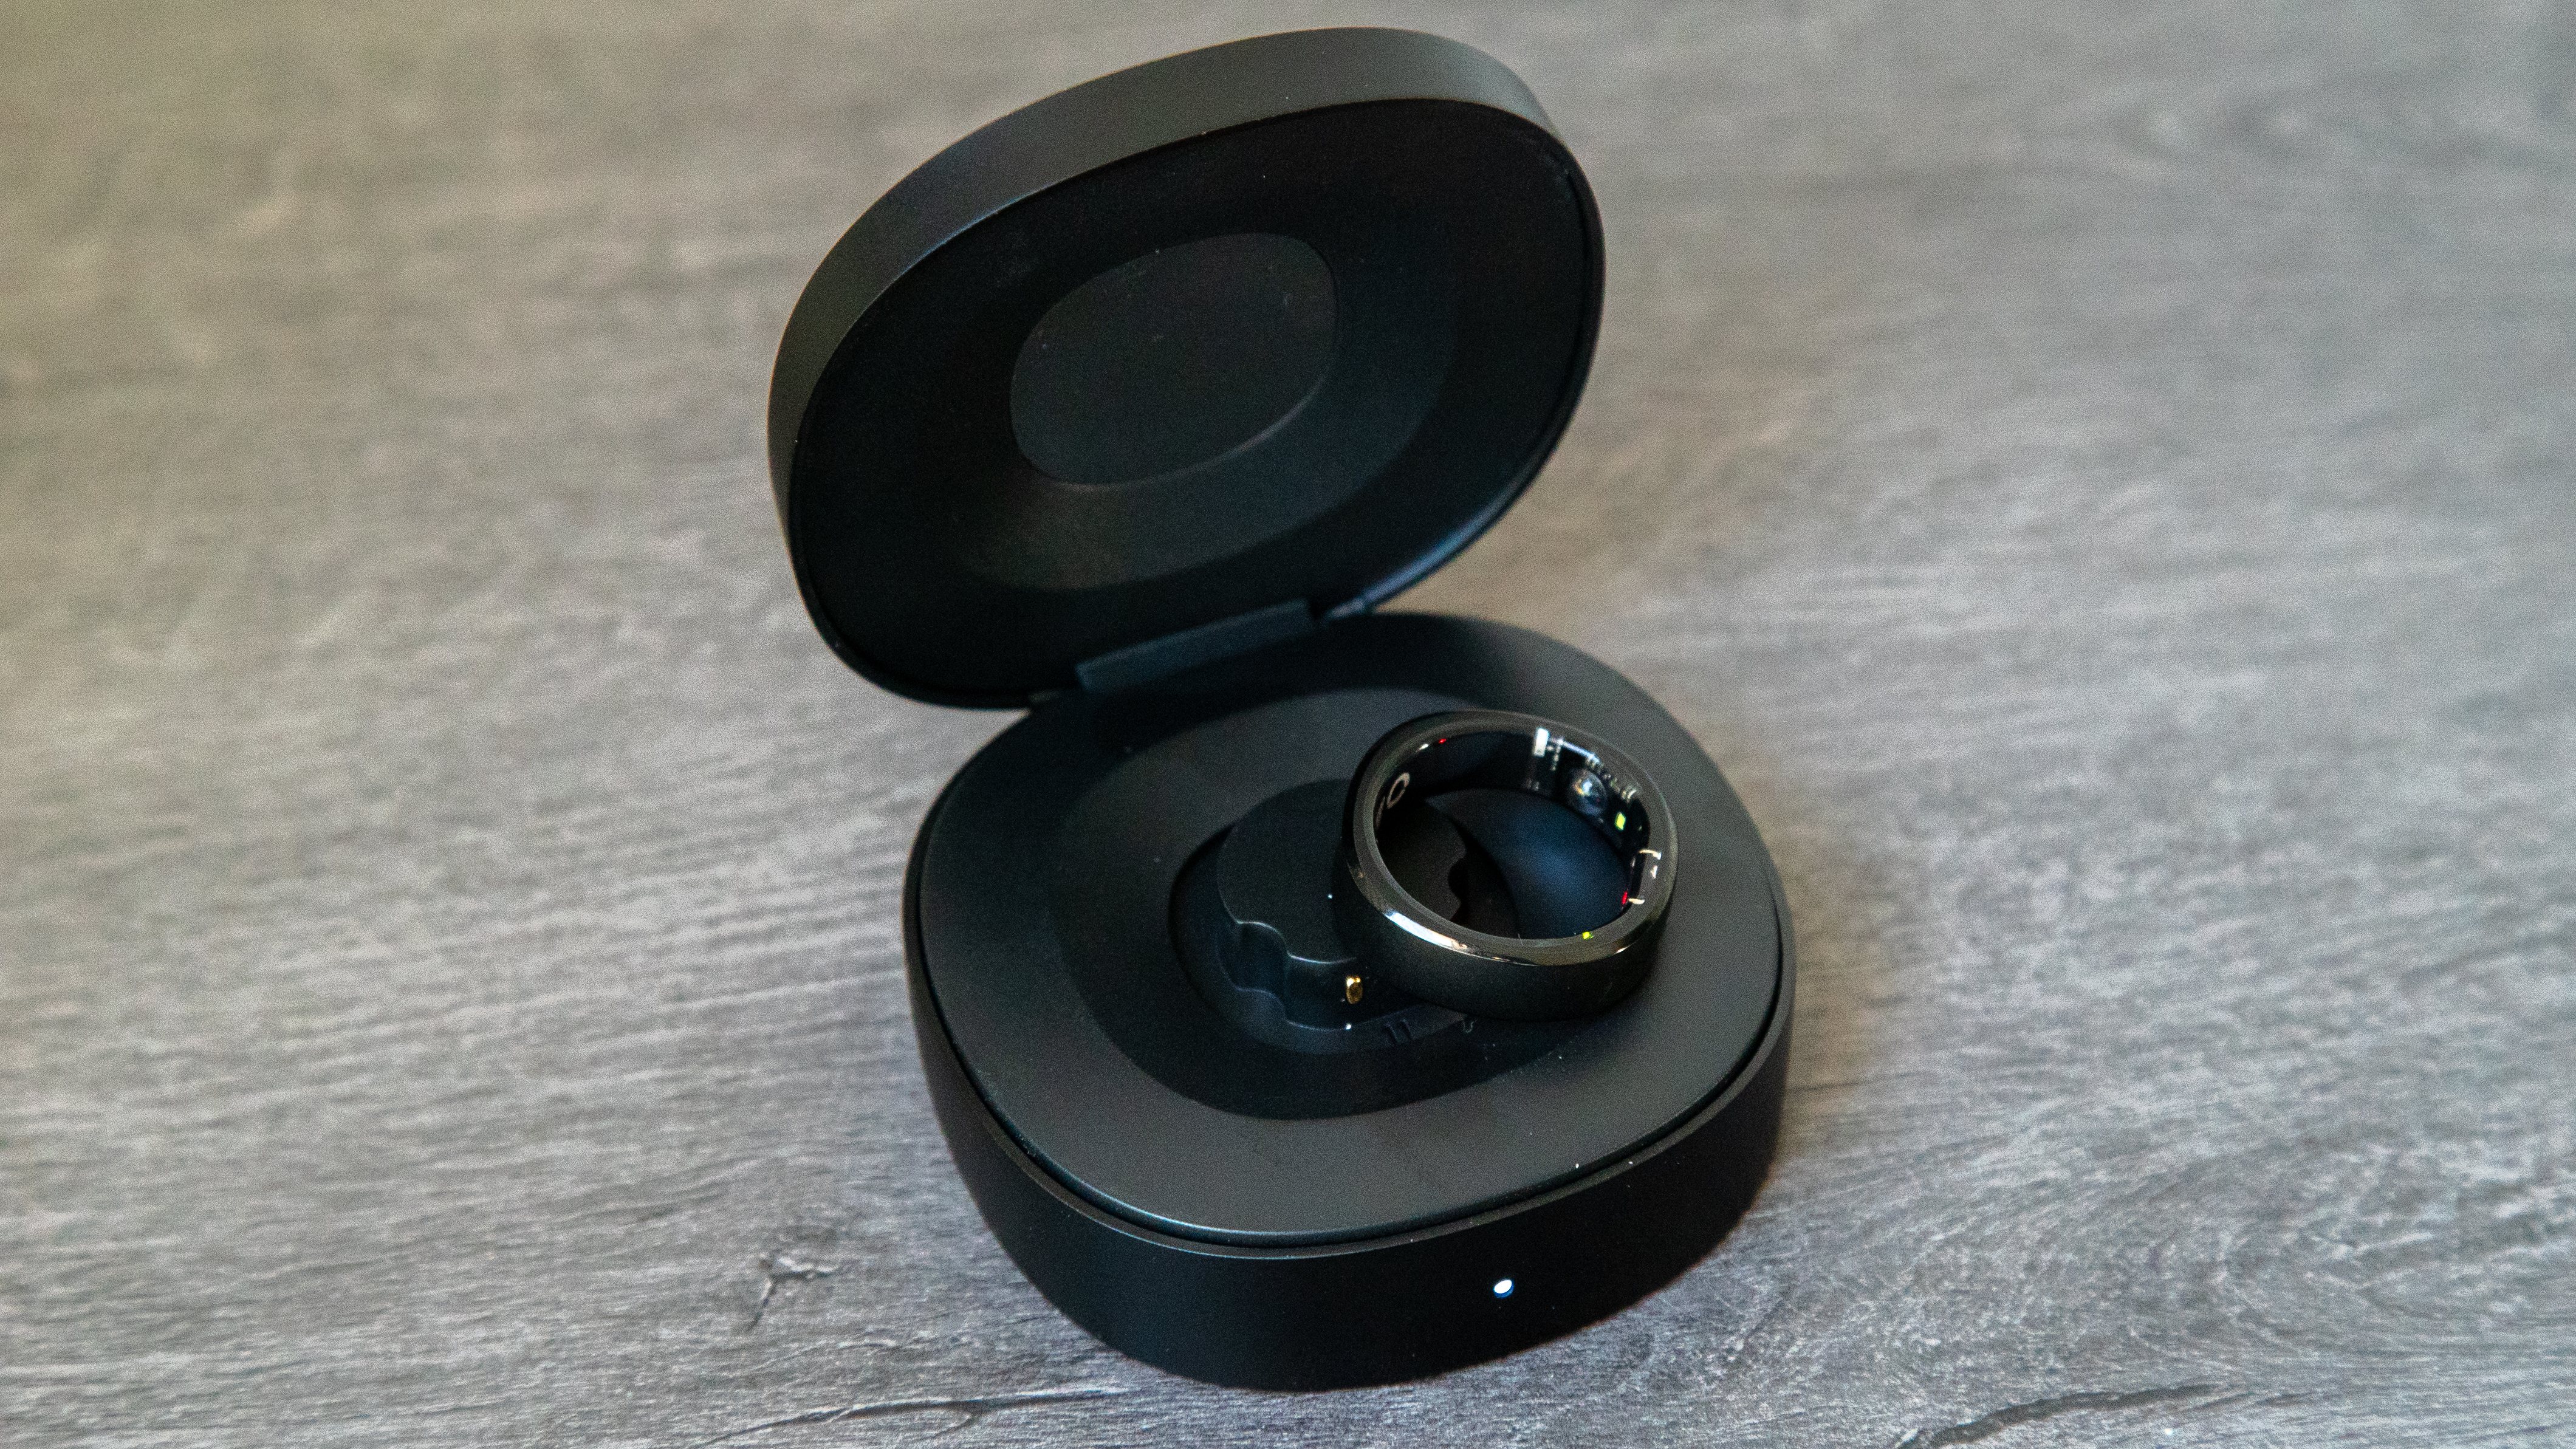 RingConn Smart Ring in the charging cradle